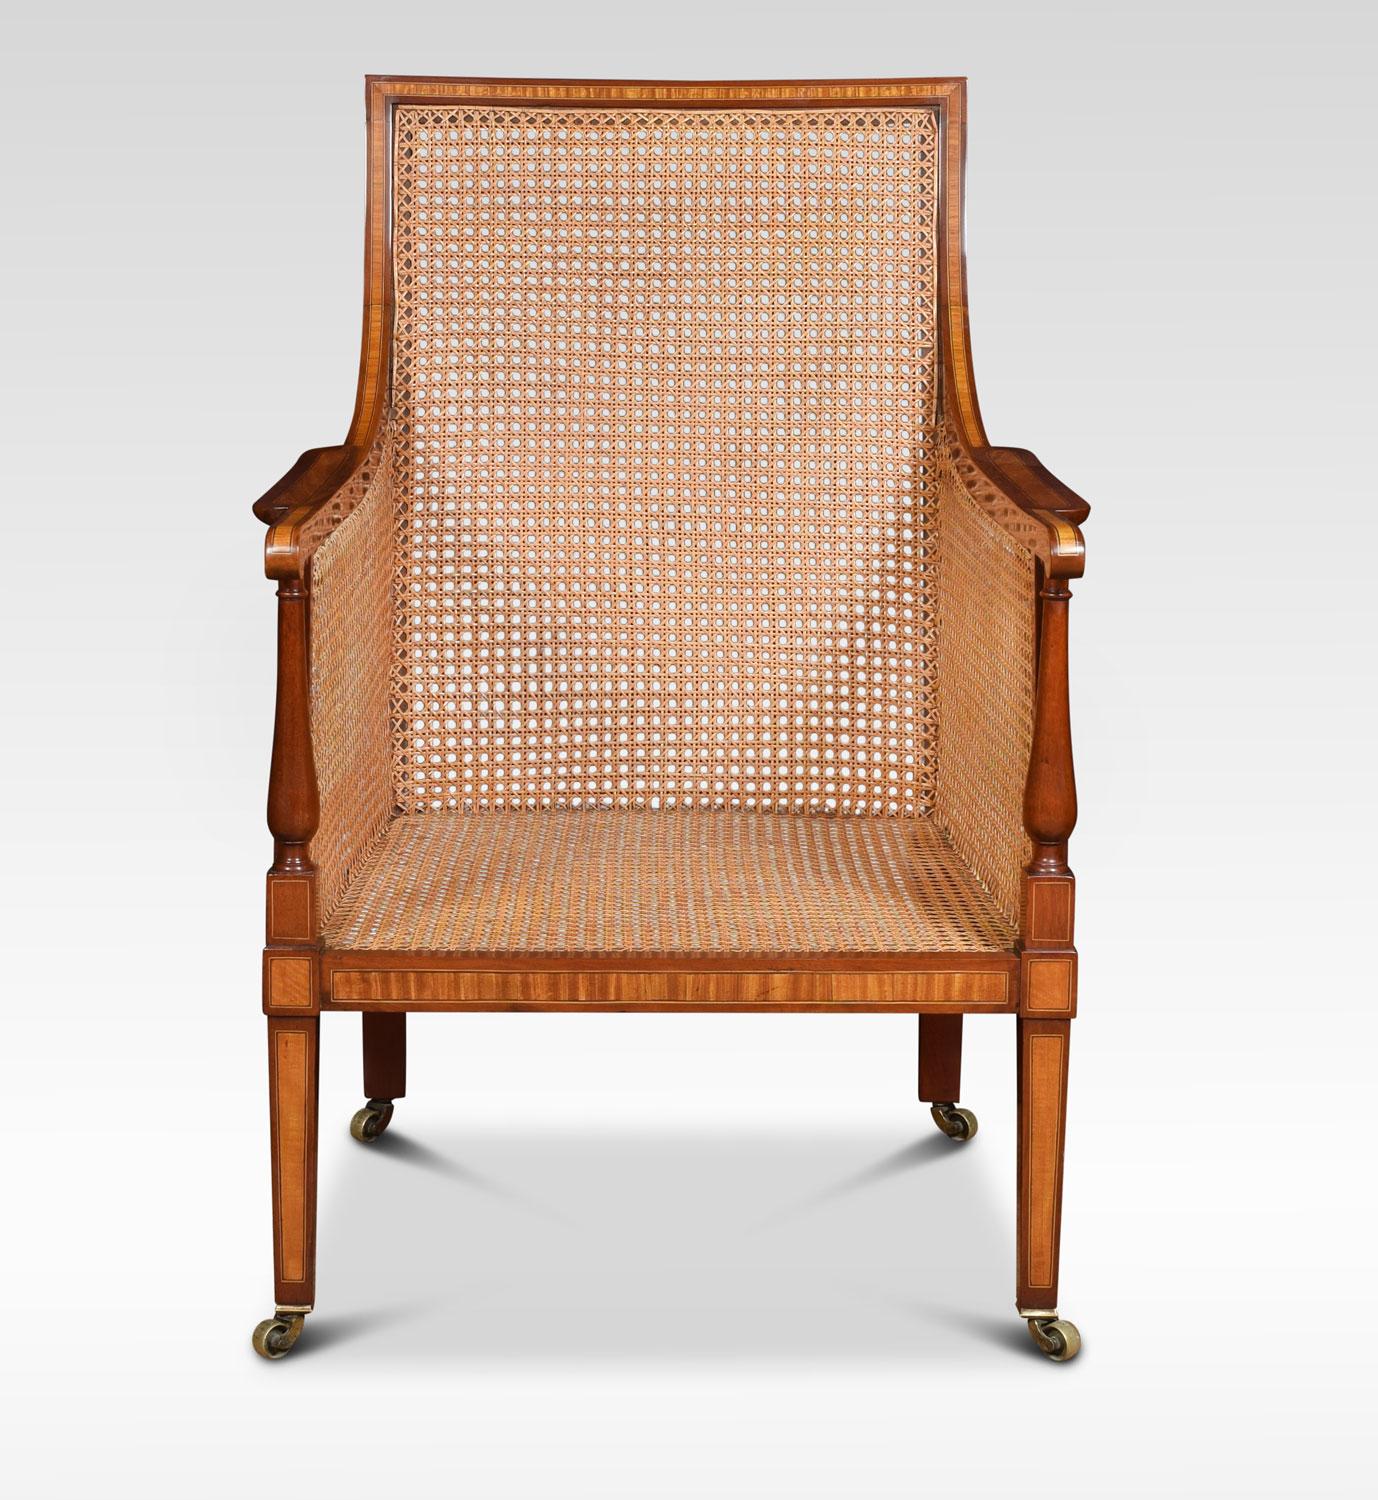 19th century bergère armchair, the solid mahogany frame having satinwood inlay throughout. The inset bergere back and seat with removable black leather cushion. Raised up on tapering front legs terminating in brass castors
Dimensions:
Height 39.5